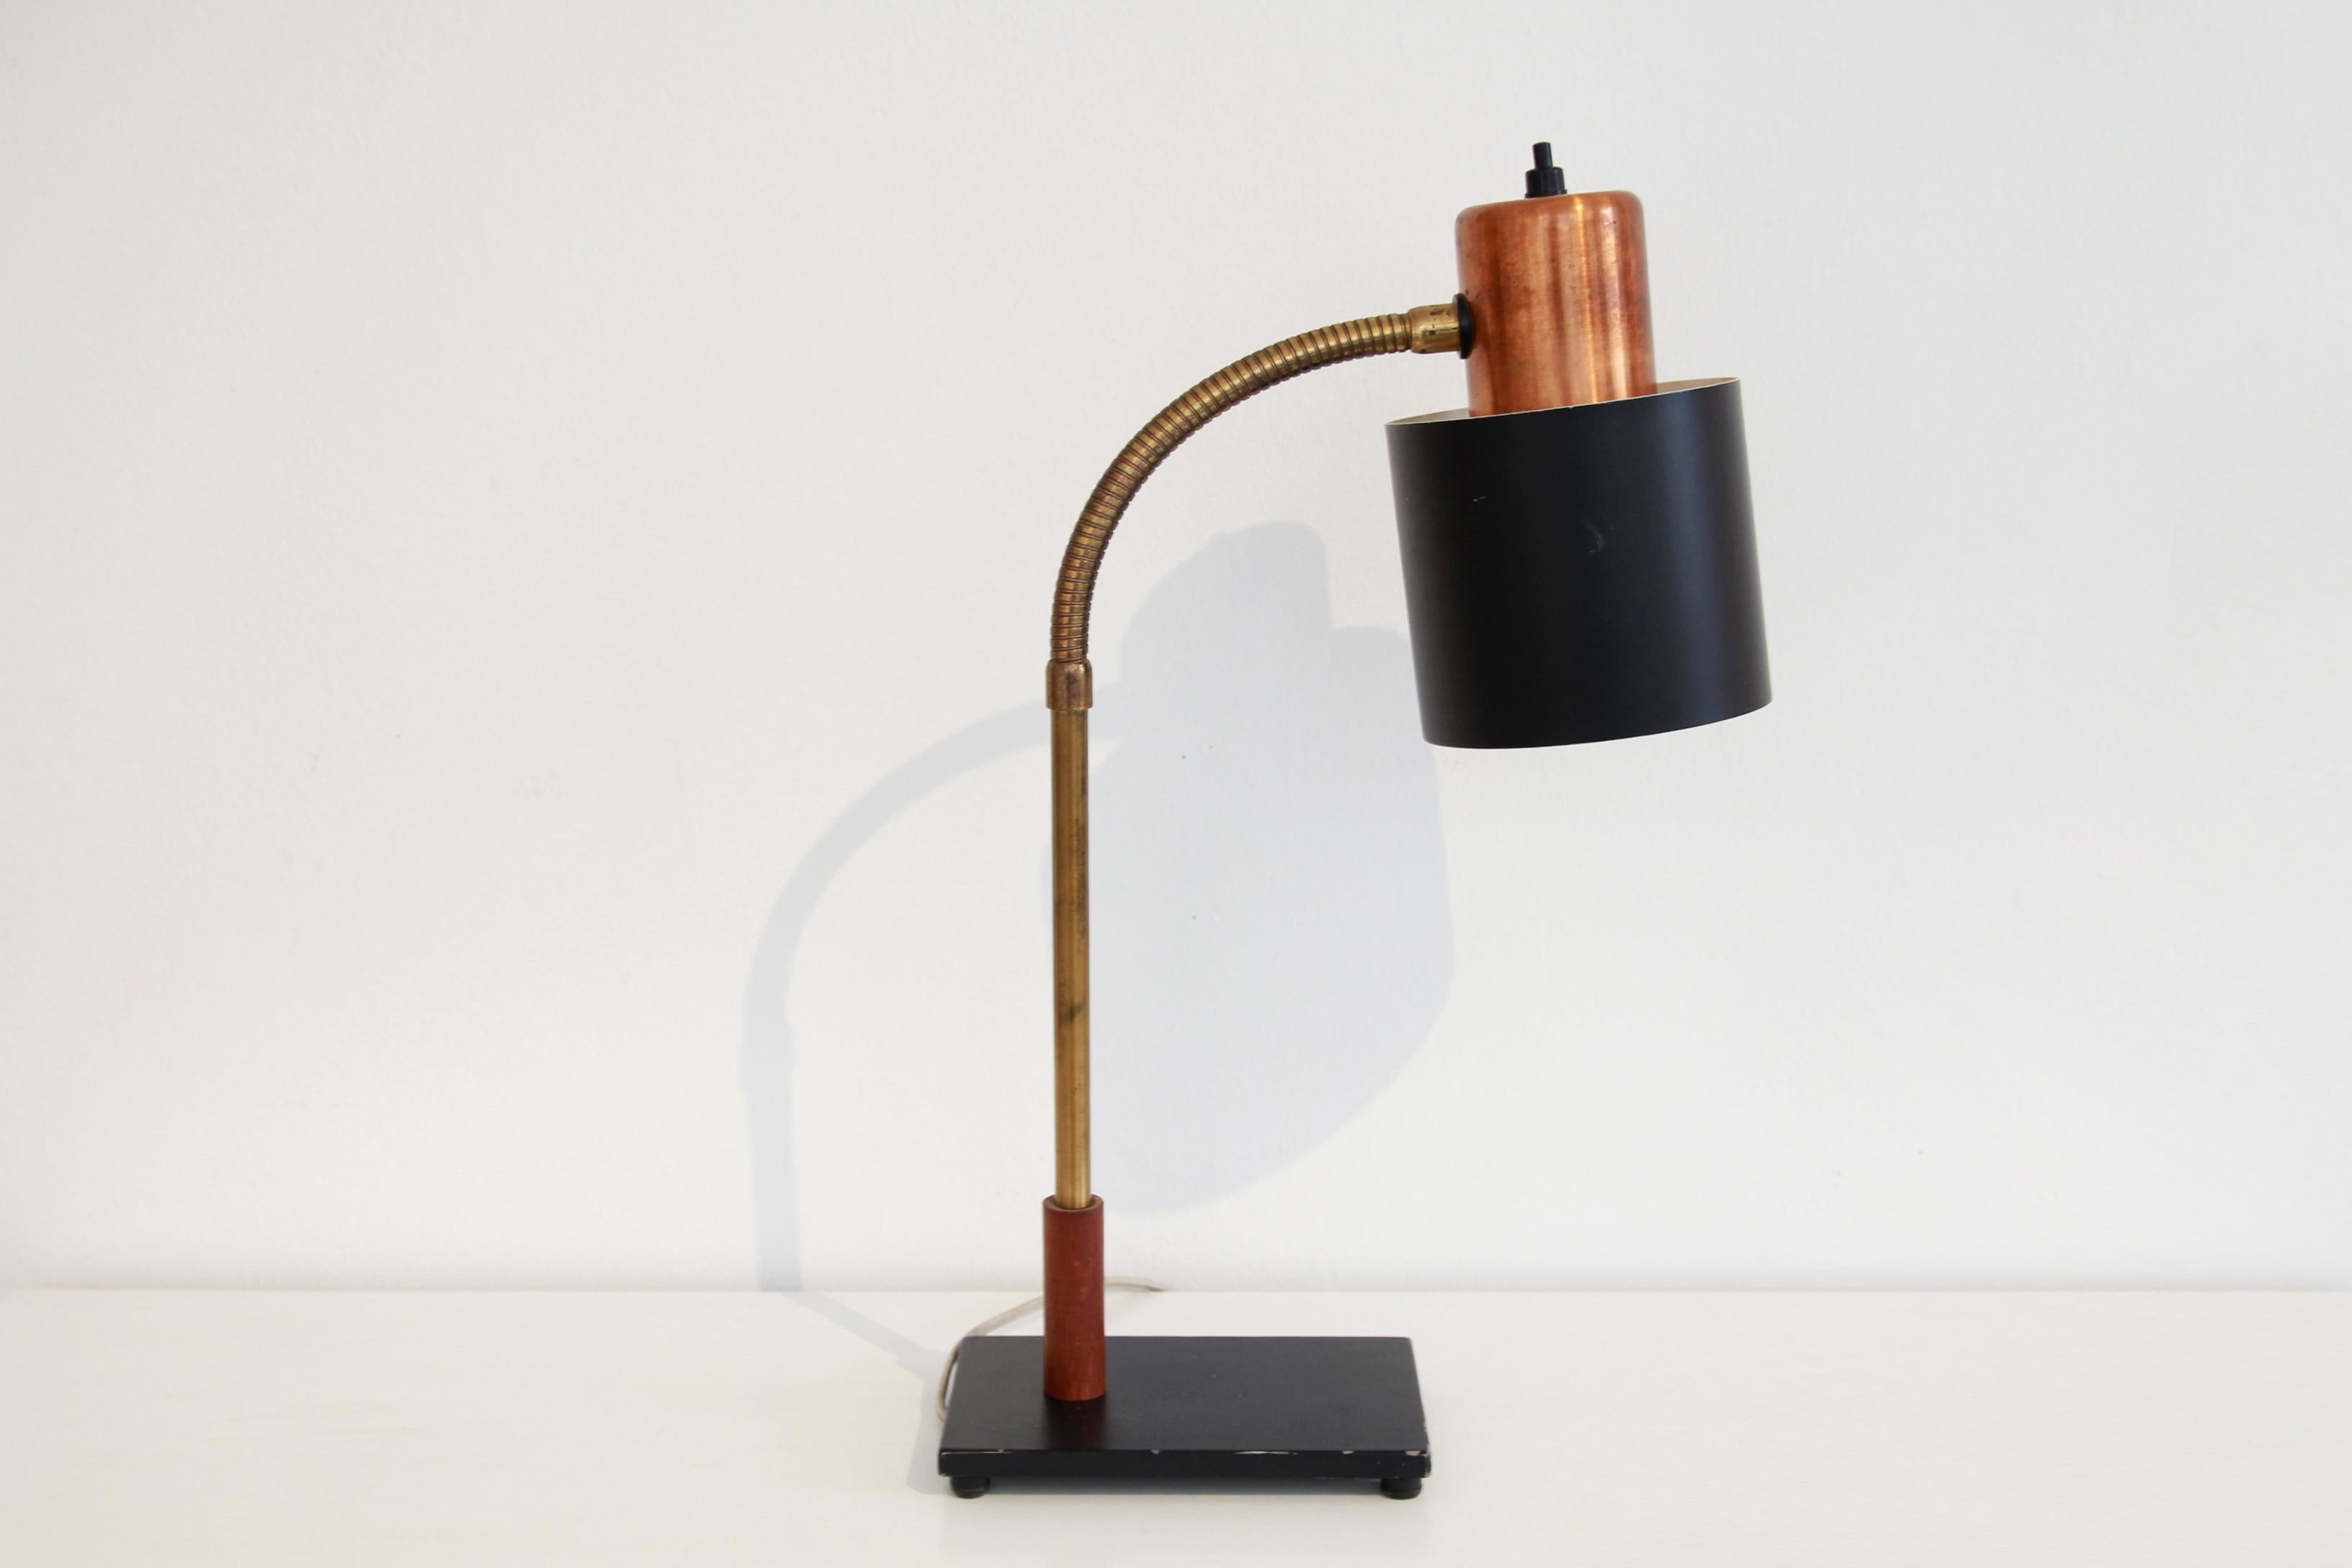 Beautiful rare table or desk lamp designed by Jo Hammerborg for Fog & Mørup in Denmark. This table lamp was designed between 1957 and 1962 and is made from very beautiful natural materials. This lamp with model name 